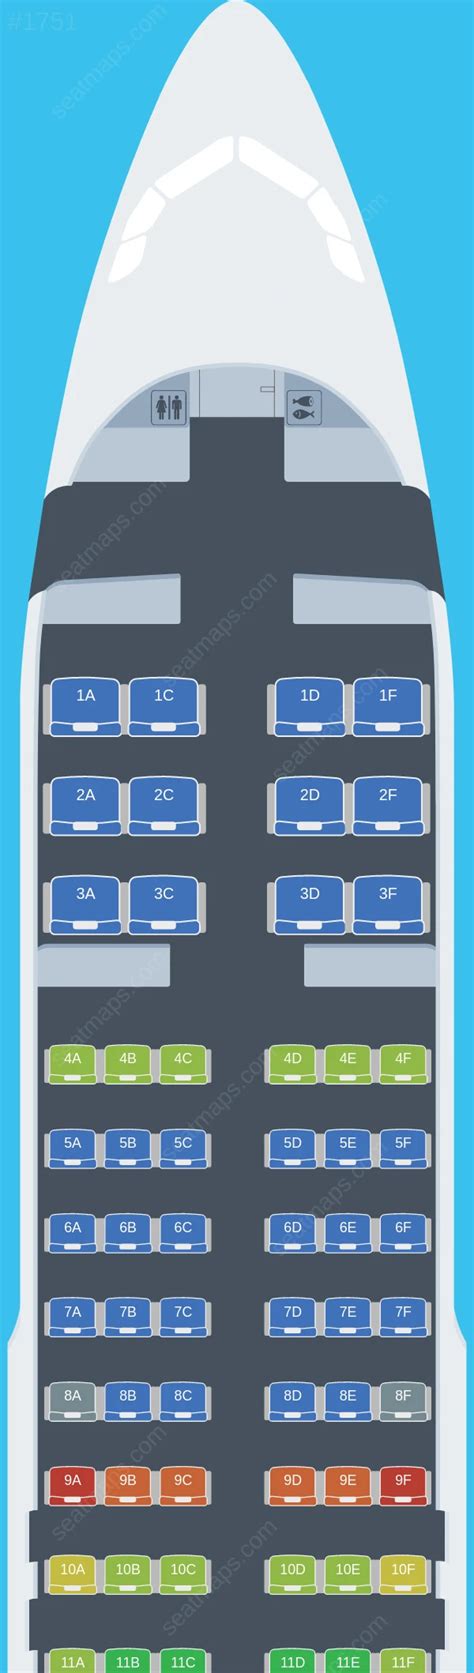 Seat Map Ratings Of American Airlines Airbus A320